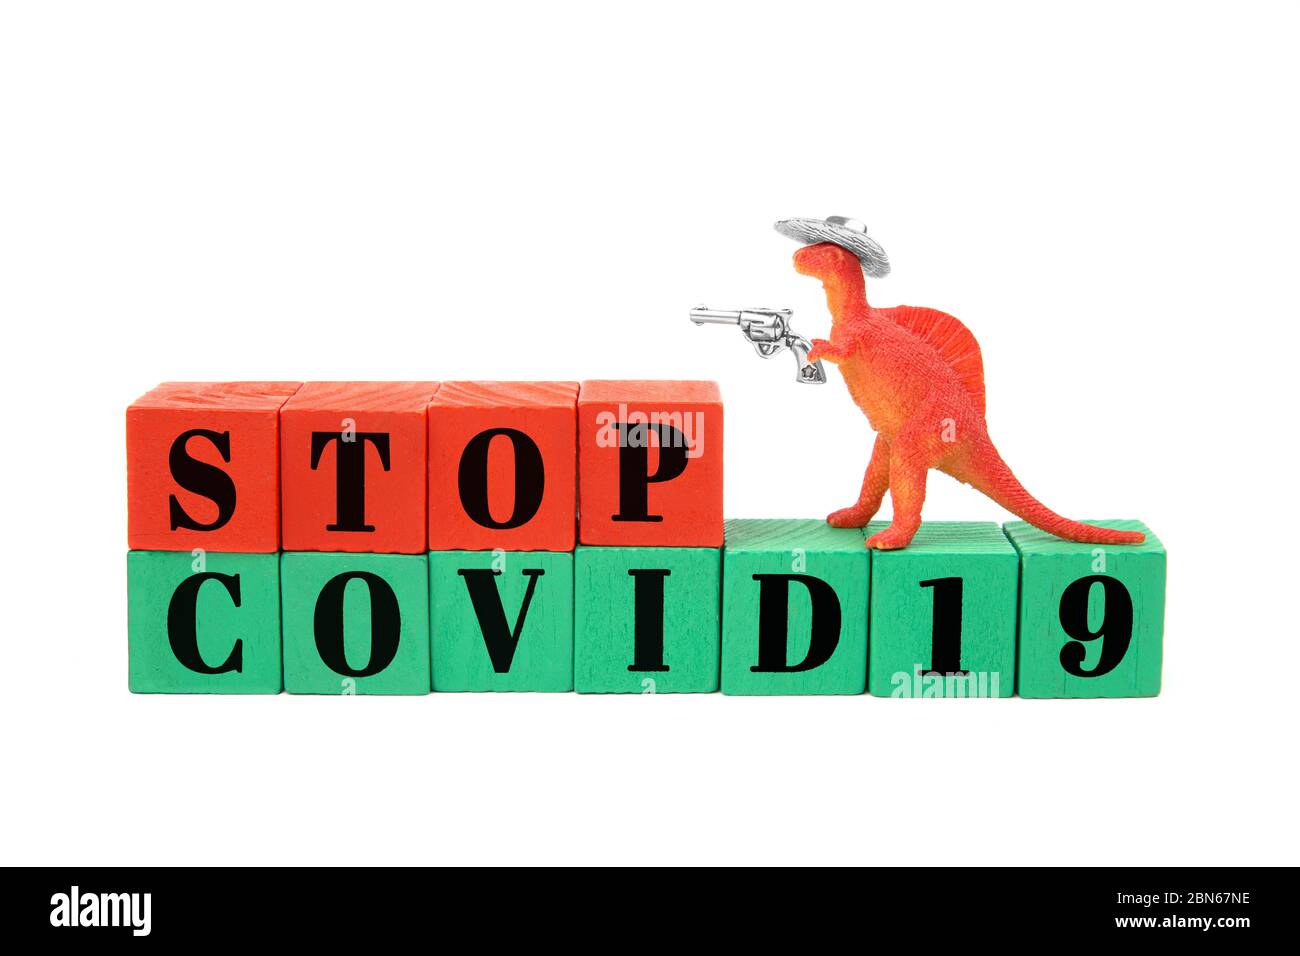 Toy dinosaur T-rex wearing a cowboy hat and holding a shining gun in his arm stands on a line of red and green wooden blocks reading Stop Covid19 Stock Photo